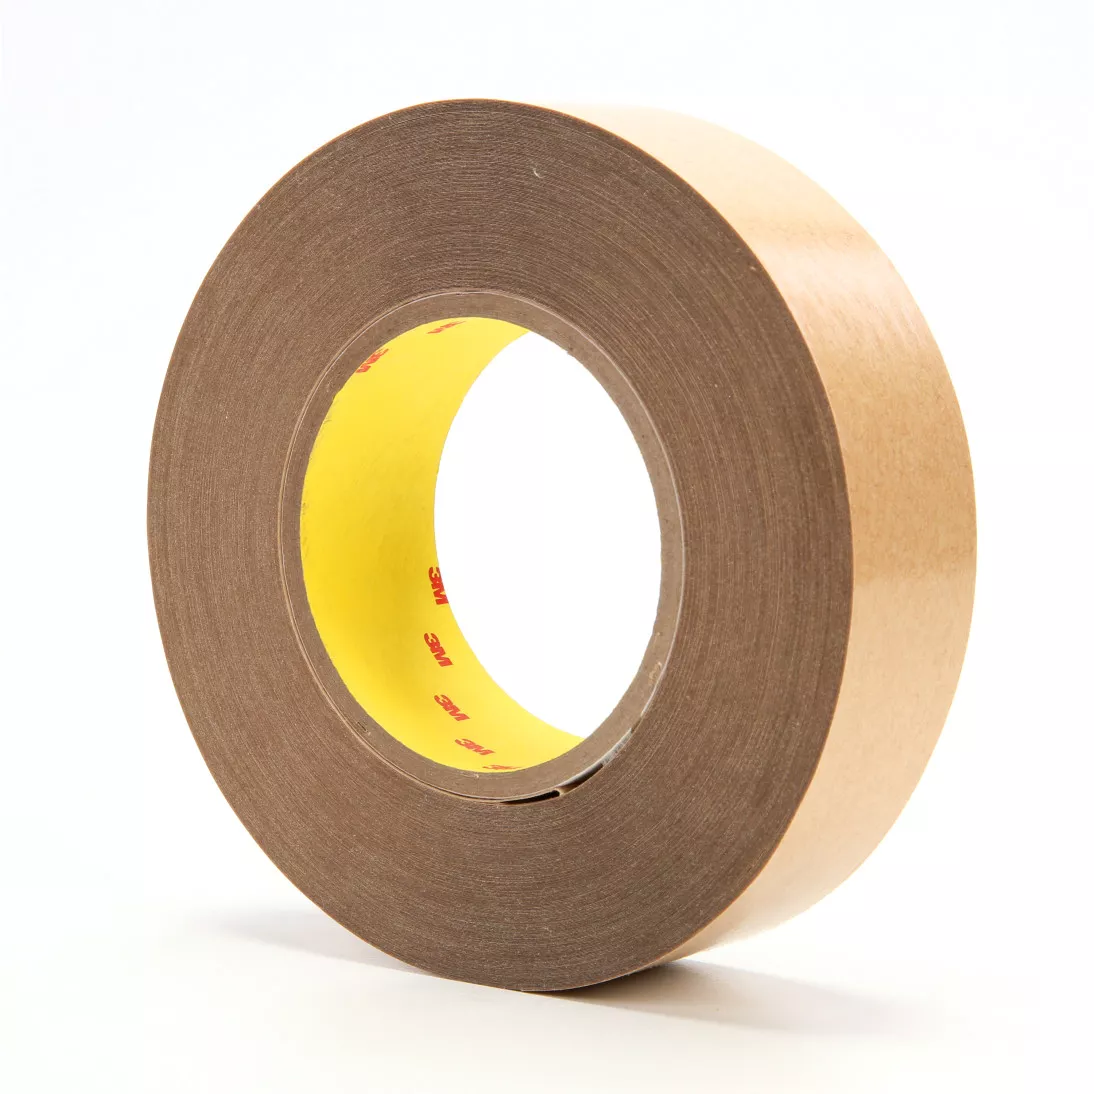 3M™ Adhesive Transfer Tape 950, Clear, 1 1/2 in x 60 yd, 5 mil, 24 rolls
per case